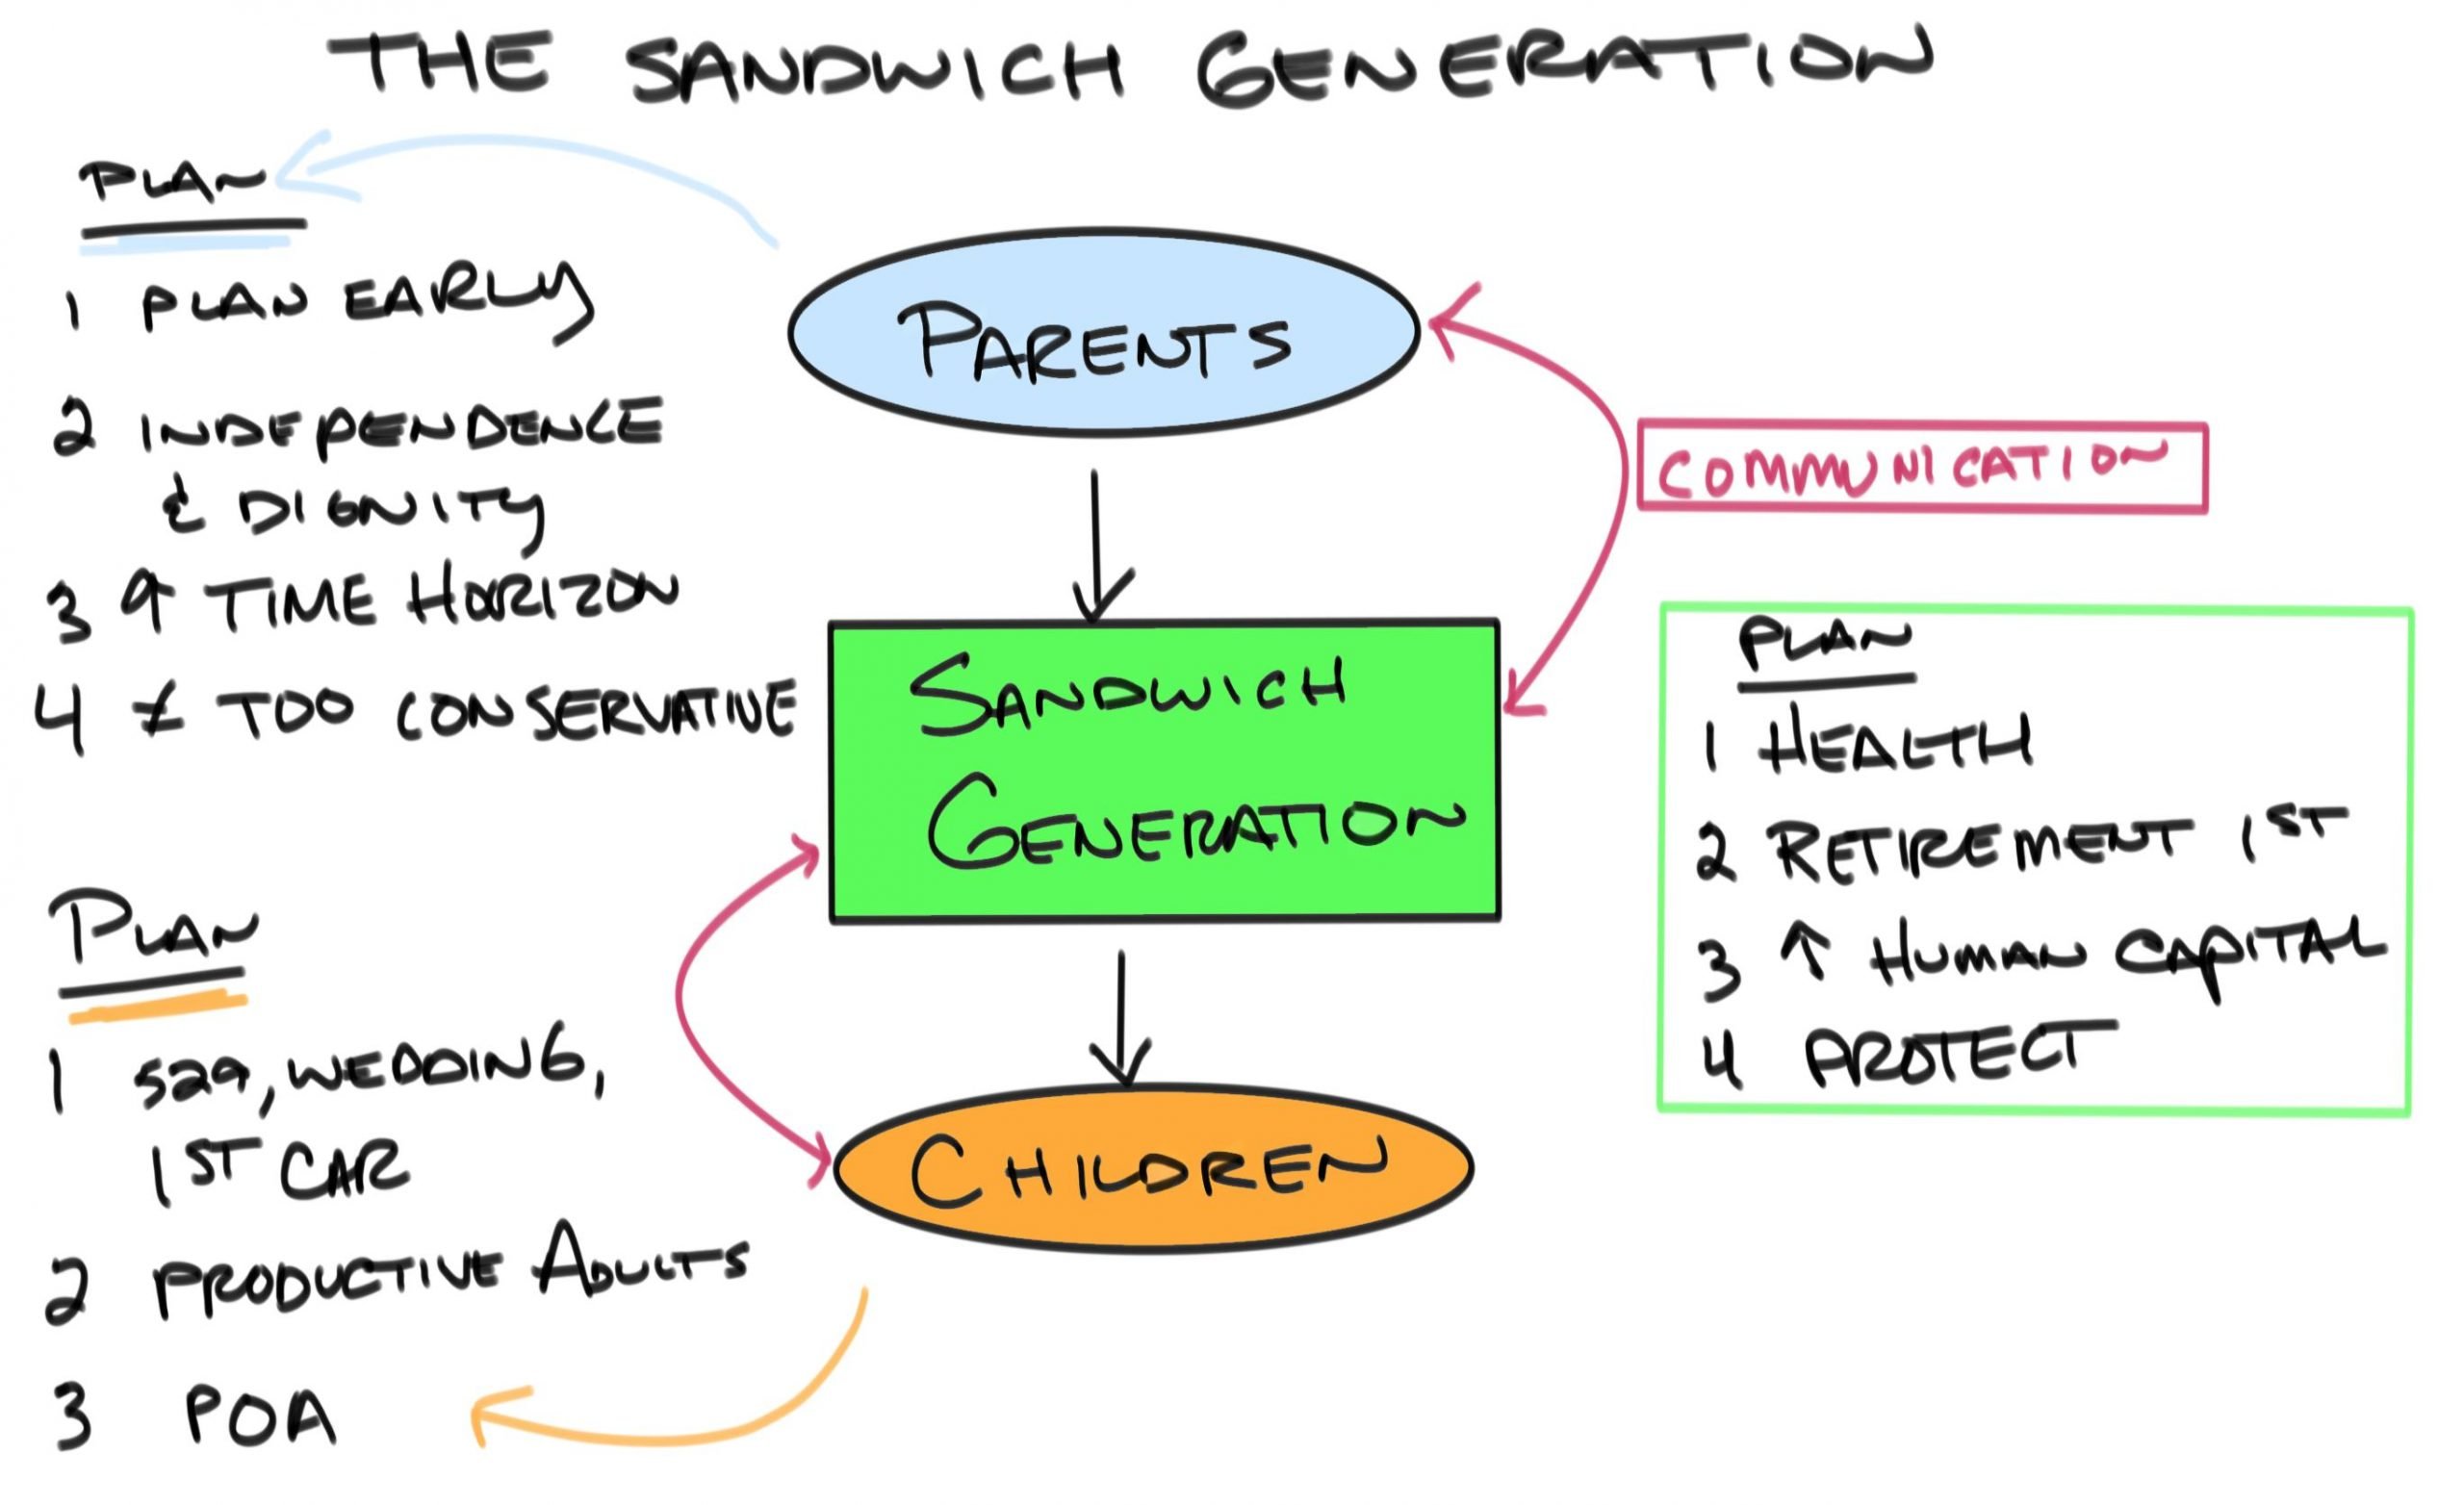 Parents in the sandwich generation must communicate, plan early and focus on health, retirement, human capital and protection.